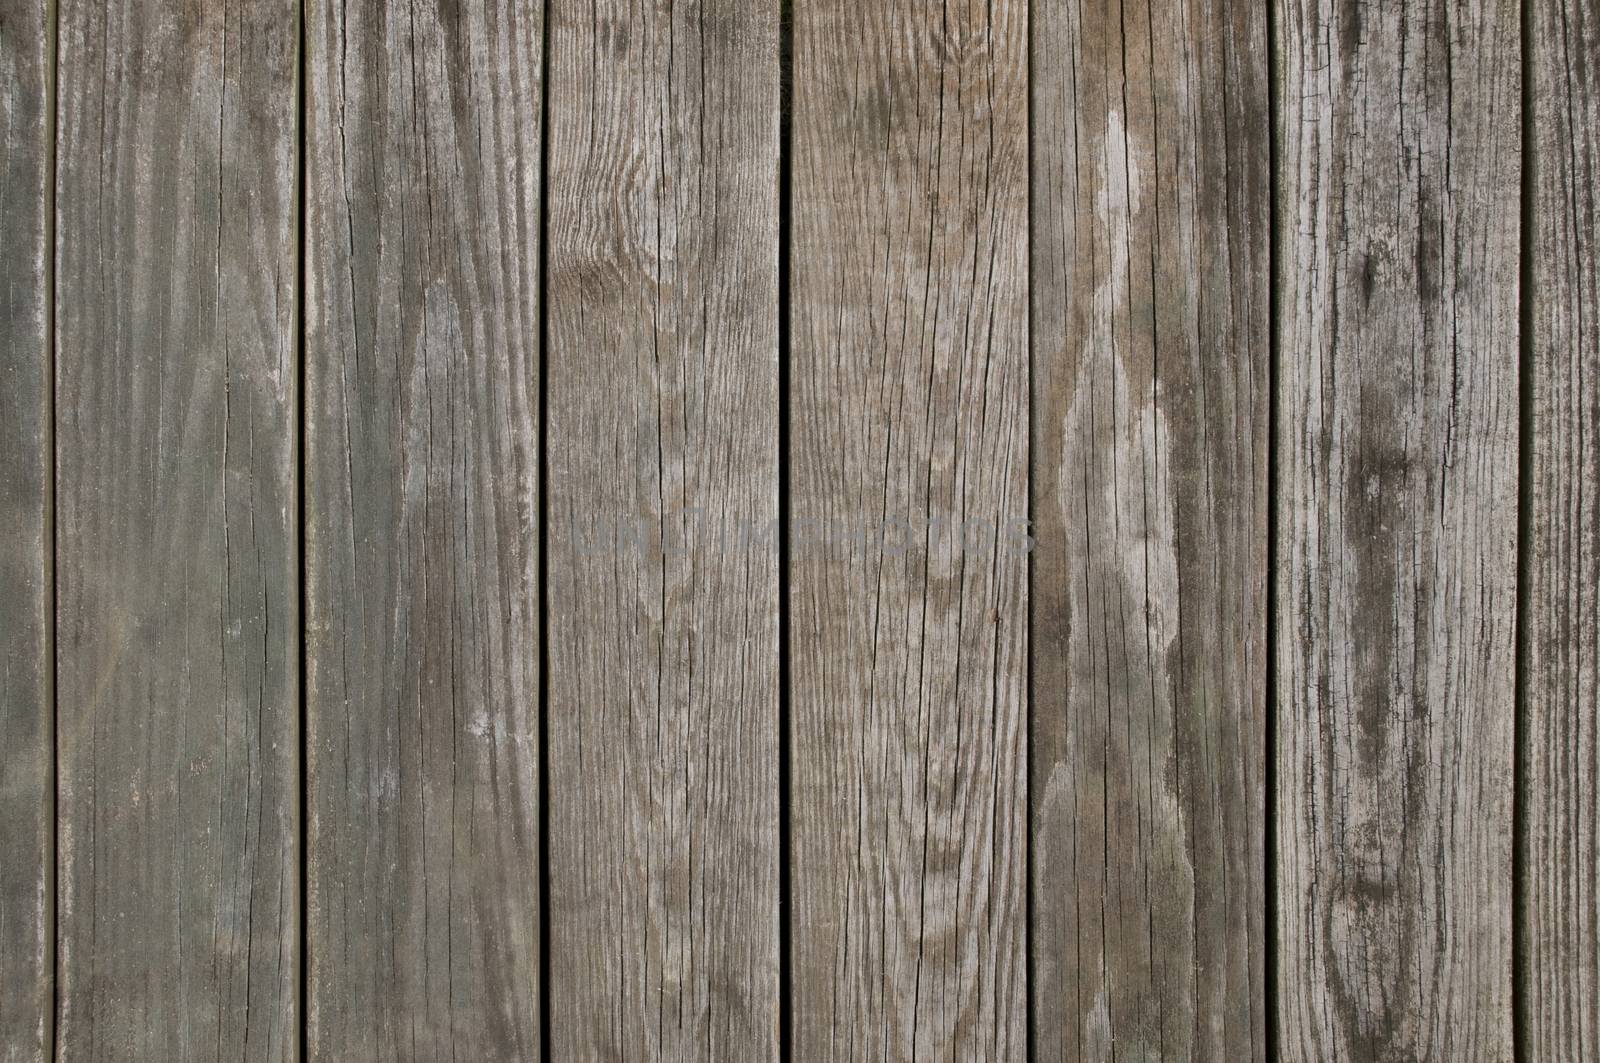 Weathered wooden planking background texture